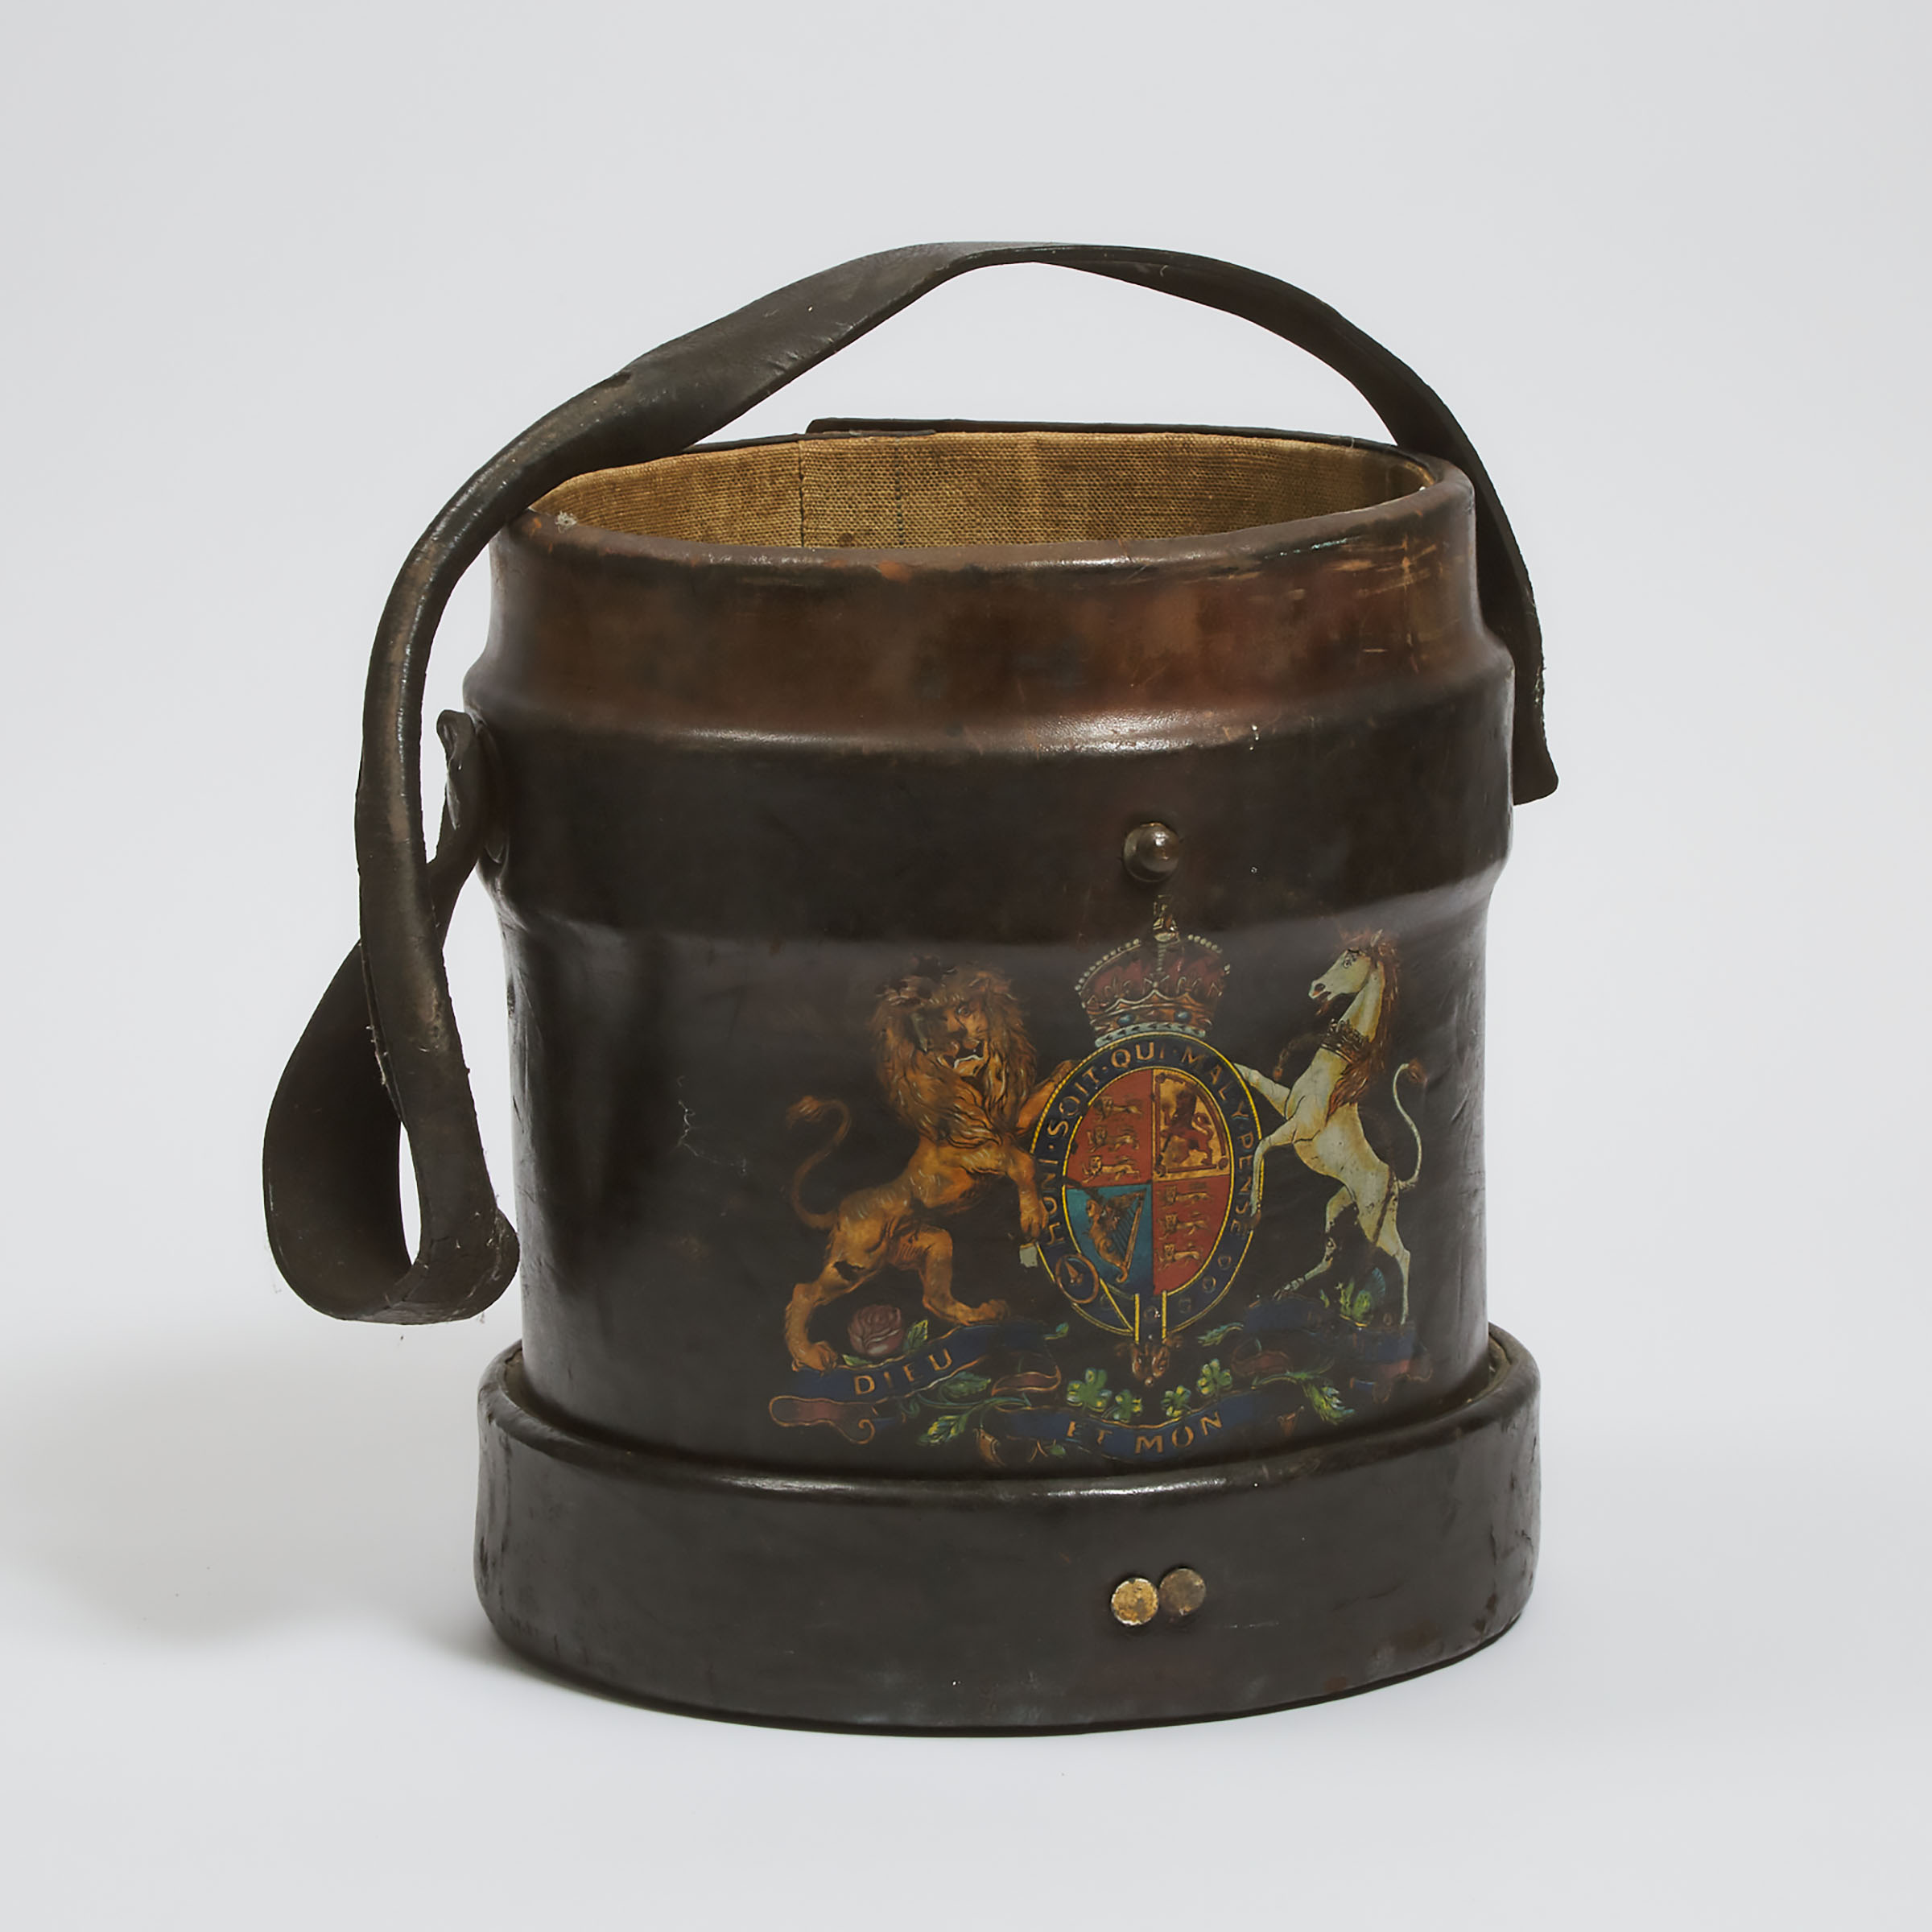 WWII British Royal Artillery Leather Shot Bucket, March, 1940